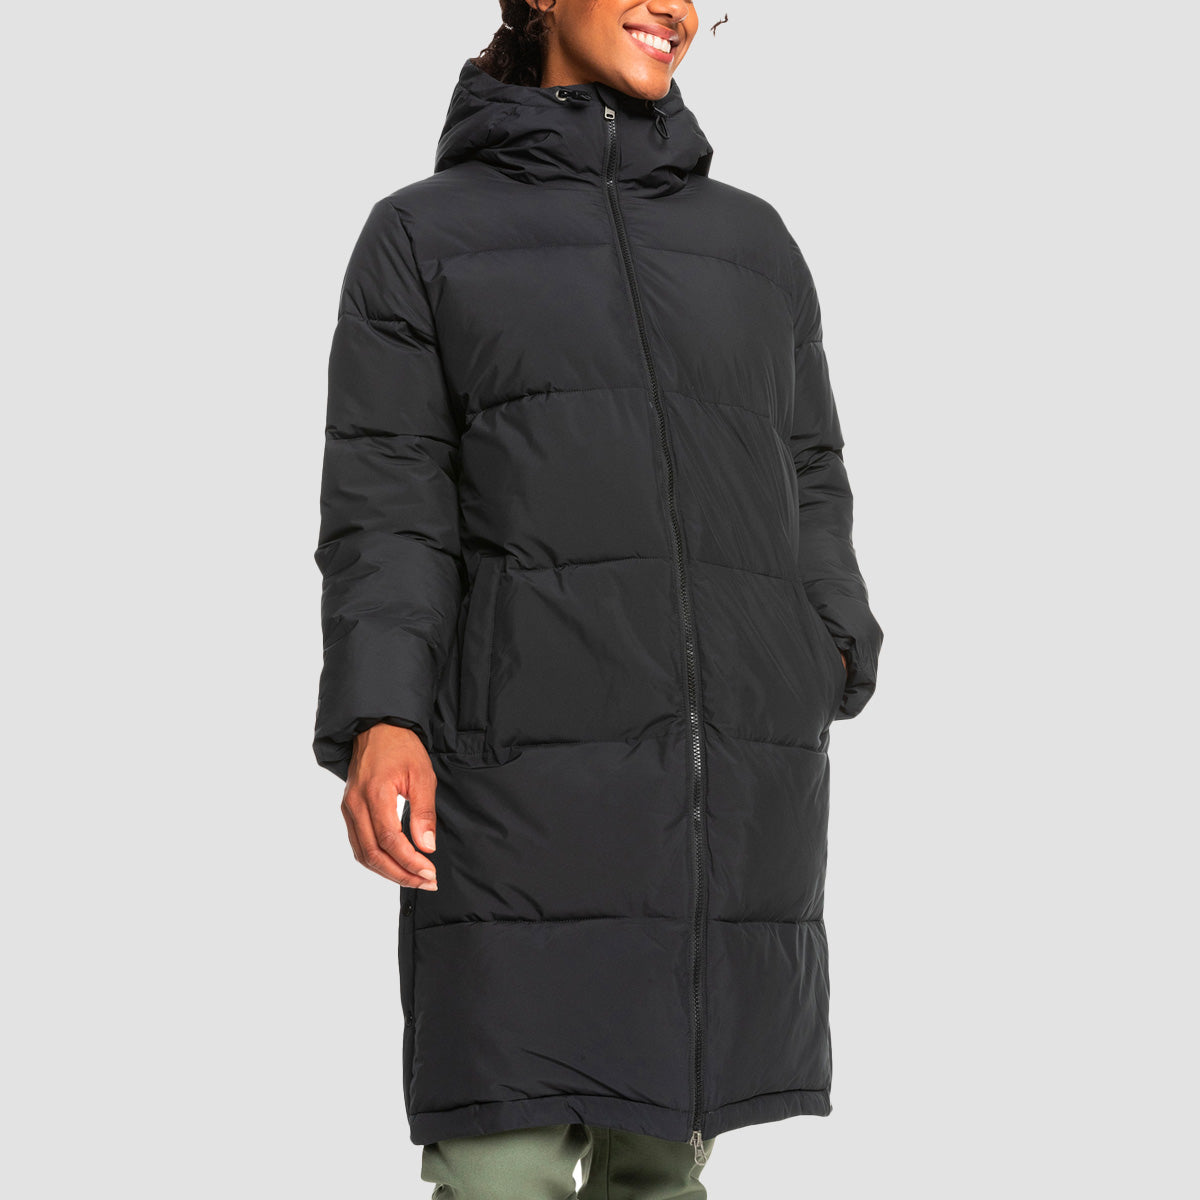 Roxy Test Of Time Puffer Jacket Anthracite - Womens